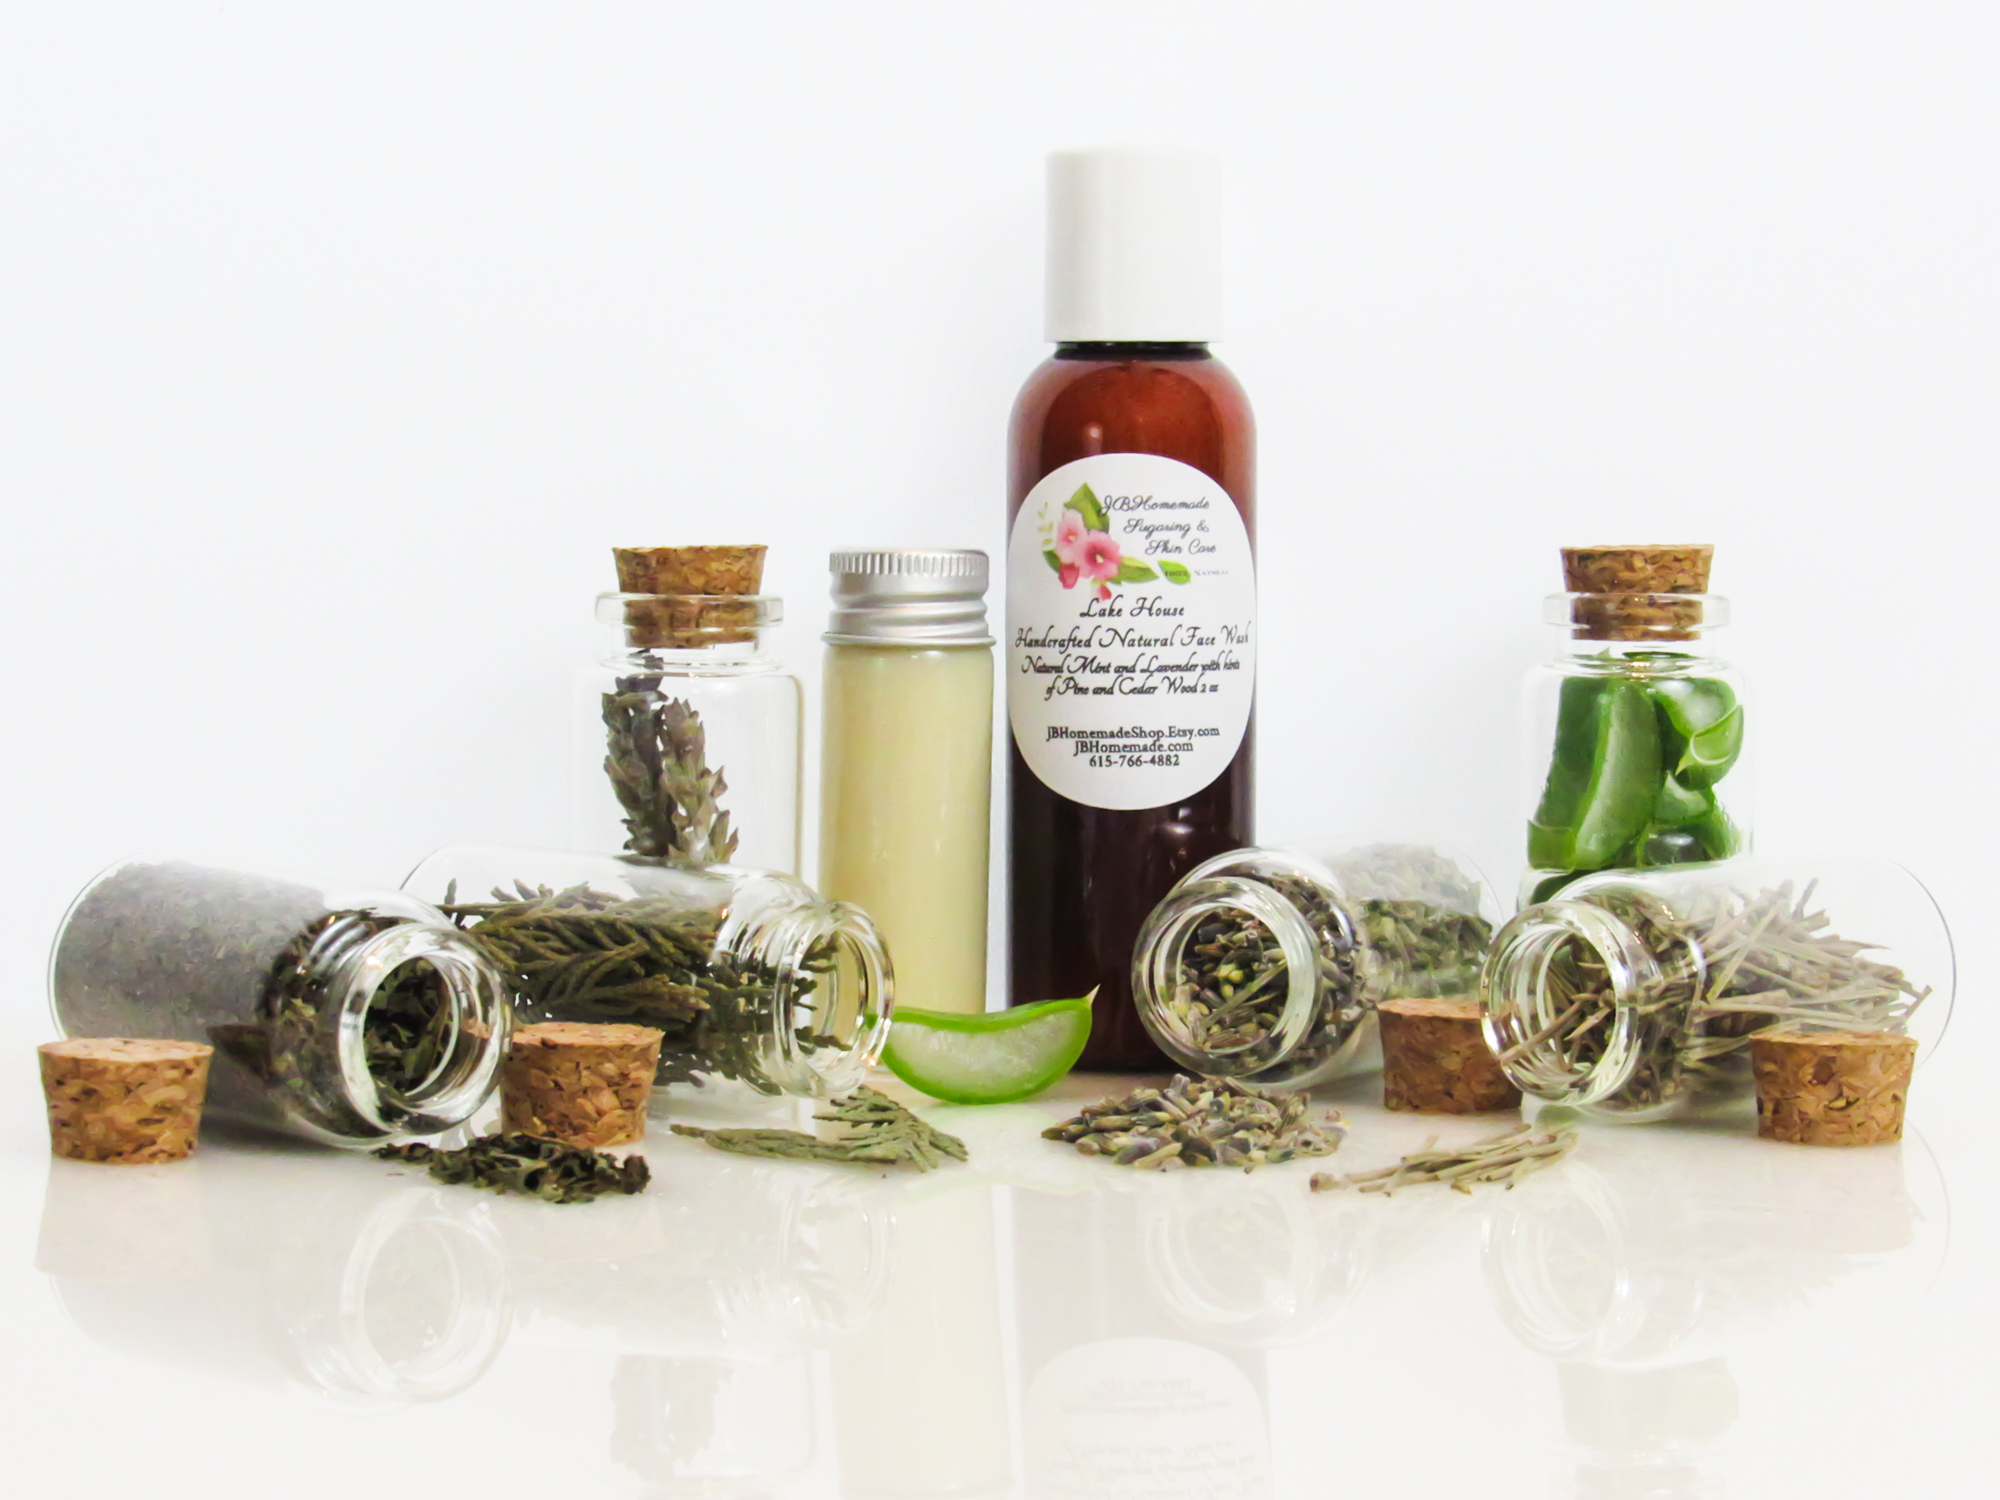 Front perspective view of an all-natural facial cleanser in an amber bottle surrounded by six small, corked glass bottles containing sprinkles of pine, cedarwood, spearmint, and lavender ingredients. A clear glass bottle showcases the face wash’s color and texture.